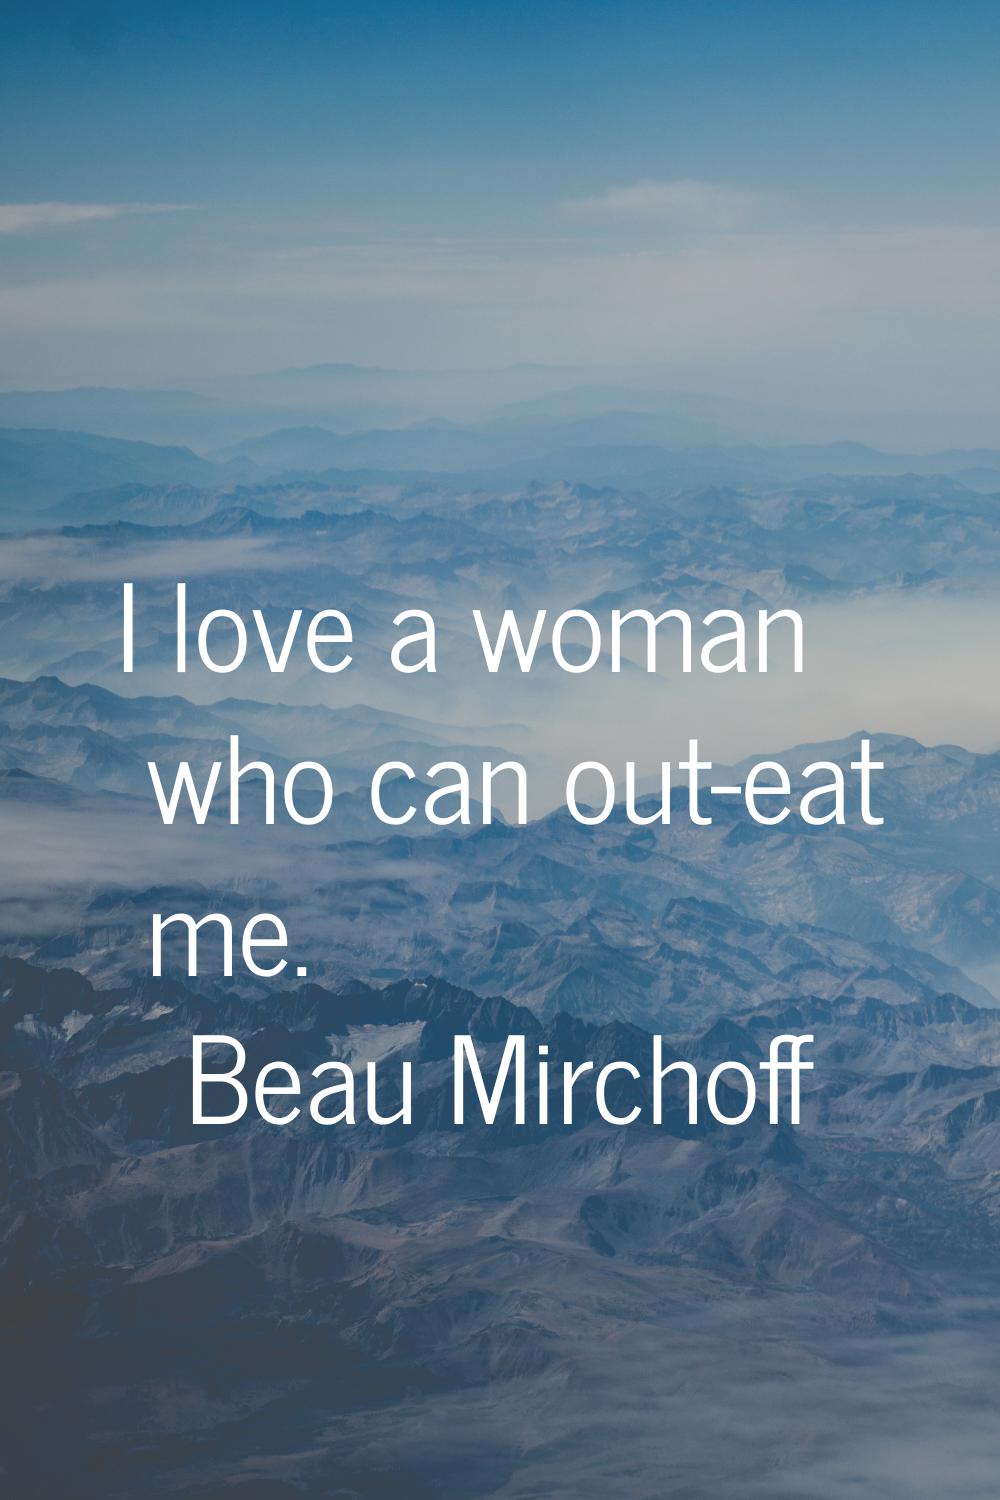 I love a woman who can out-eat me.